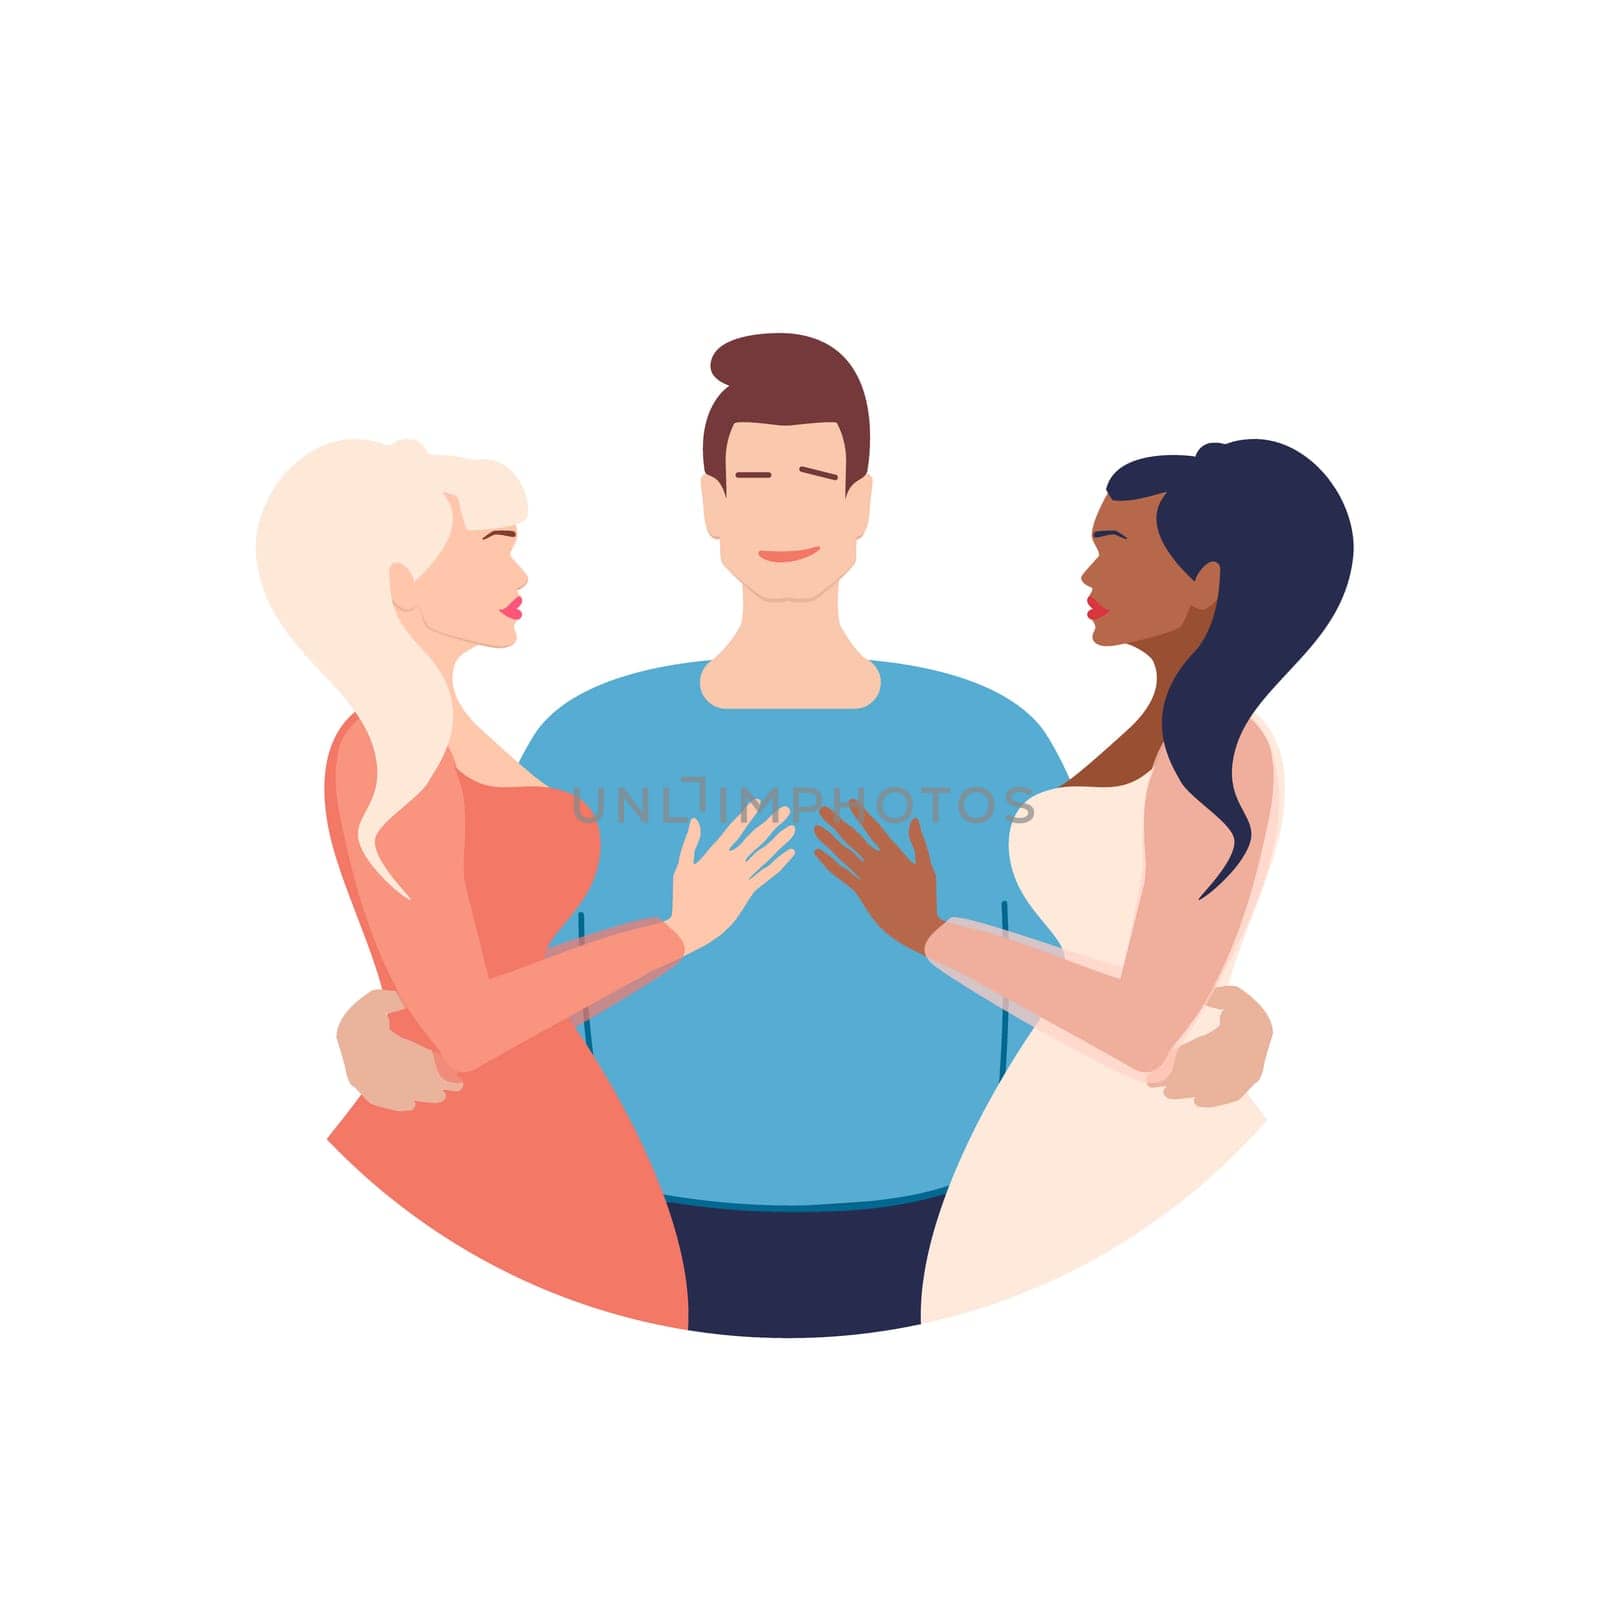 Polyamory in relationships.Polyamory.Open relationship. Polyamory conceptual illustration. A young guy embraces two beautiful girls. hug.illustration in a flat style.